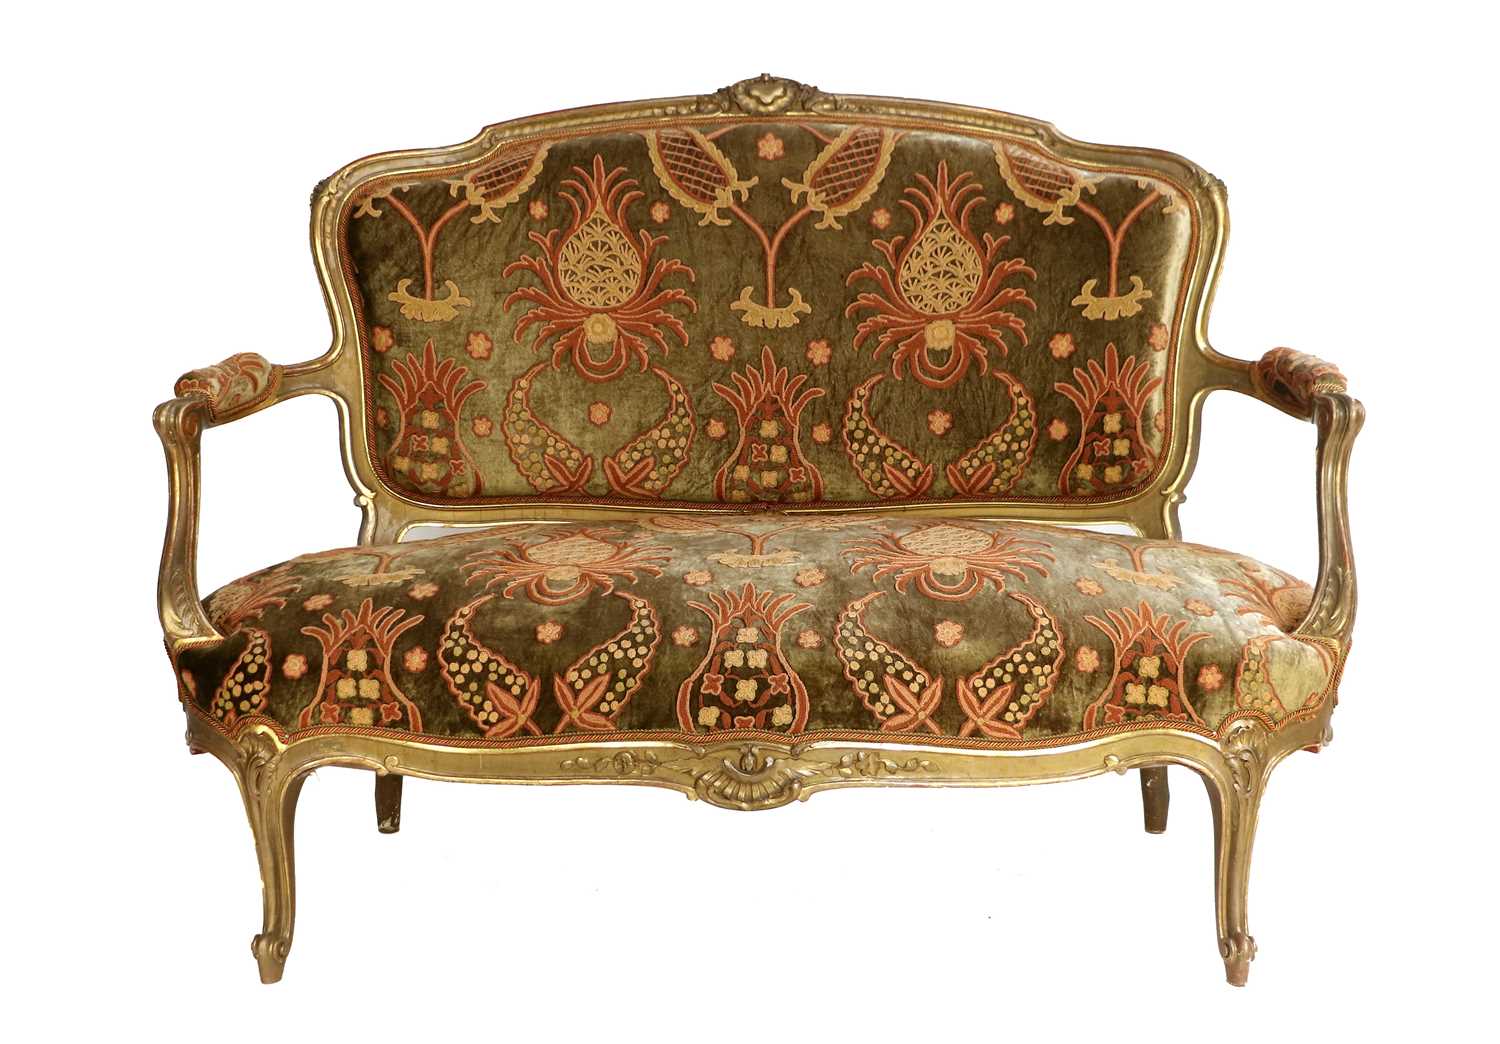 A Victorian Gilt and Gesso Five-Piece Salon Suite, late 19th century, recovered in modern - Image 3 of 3